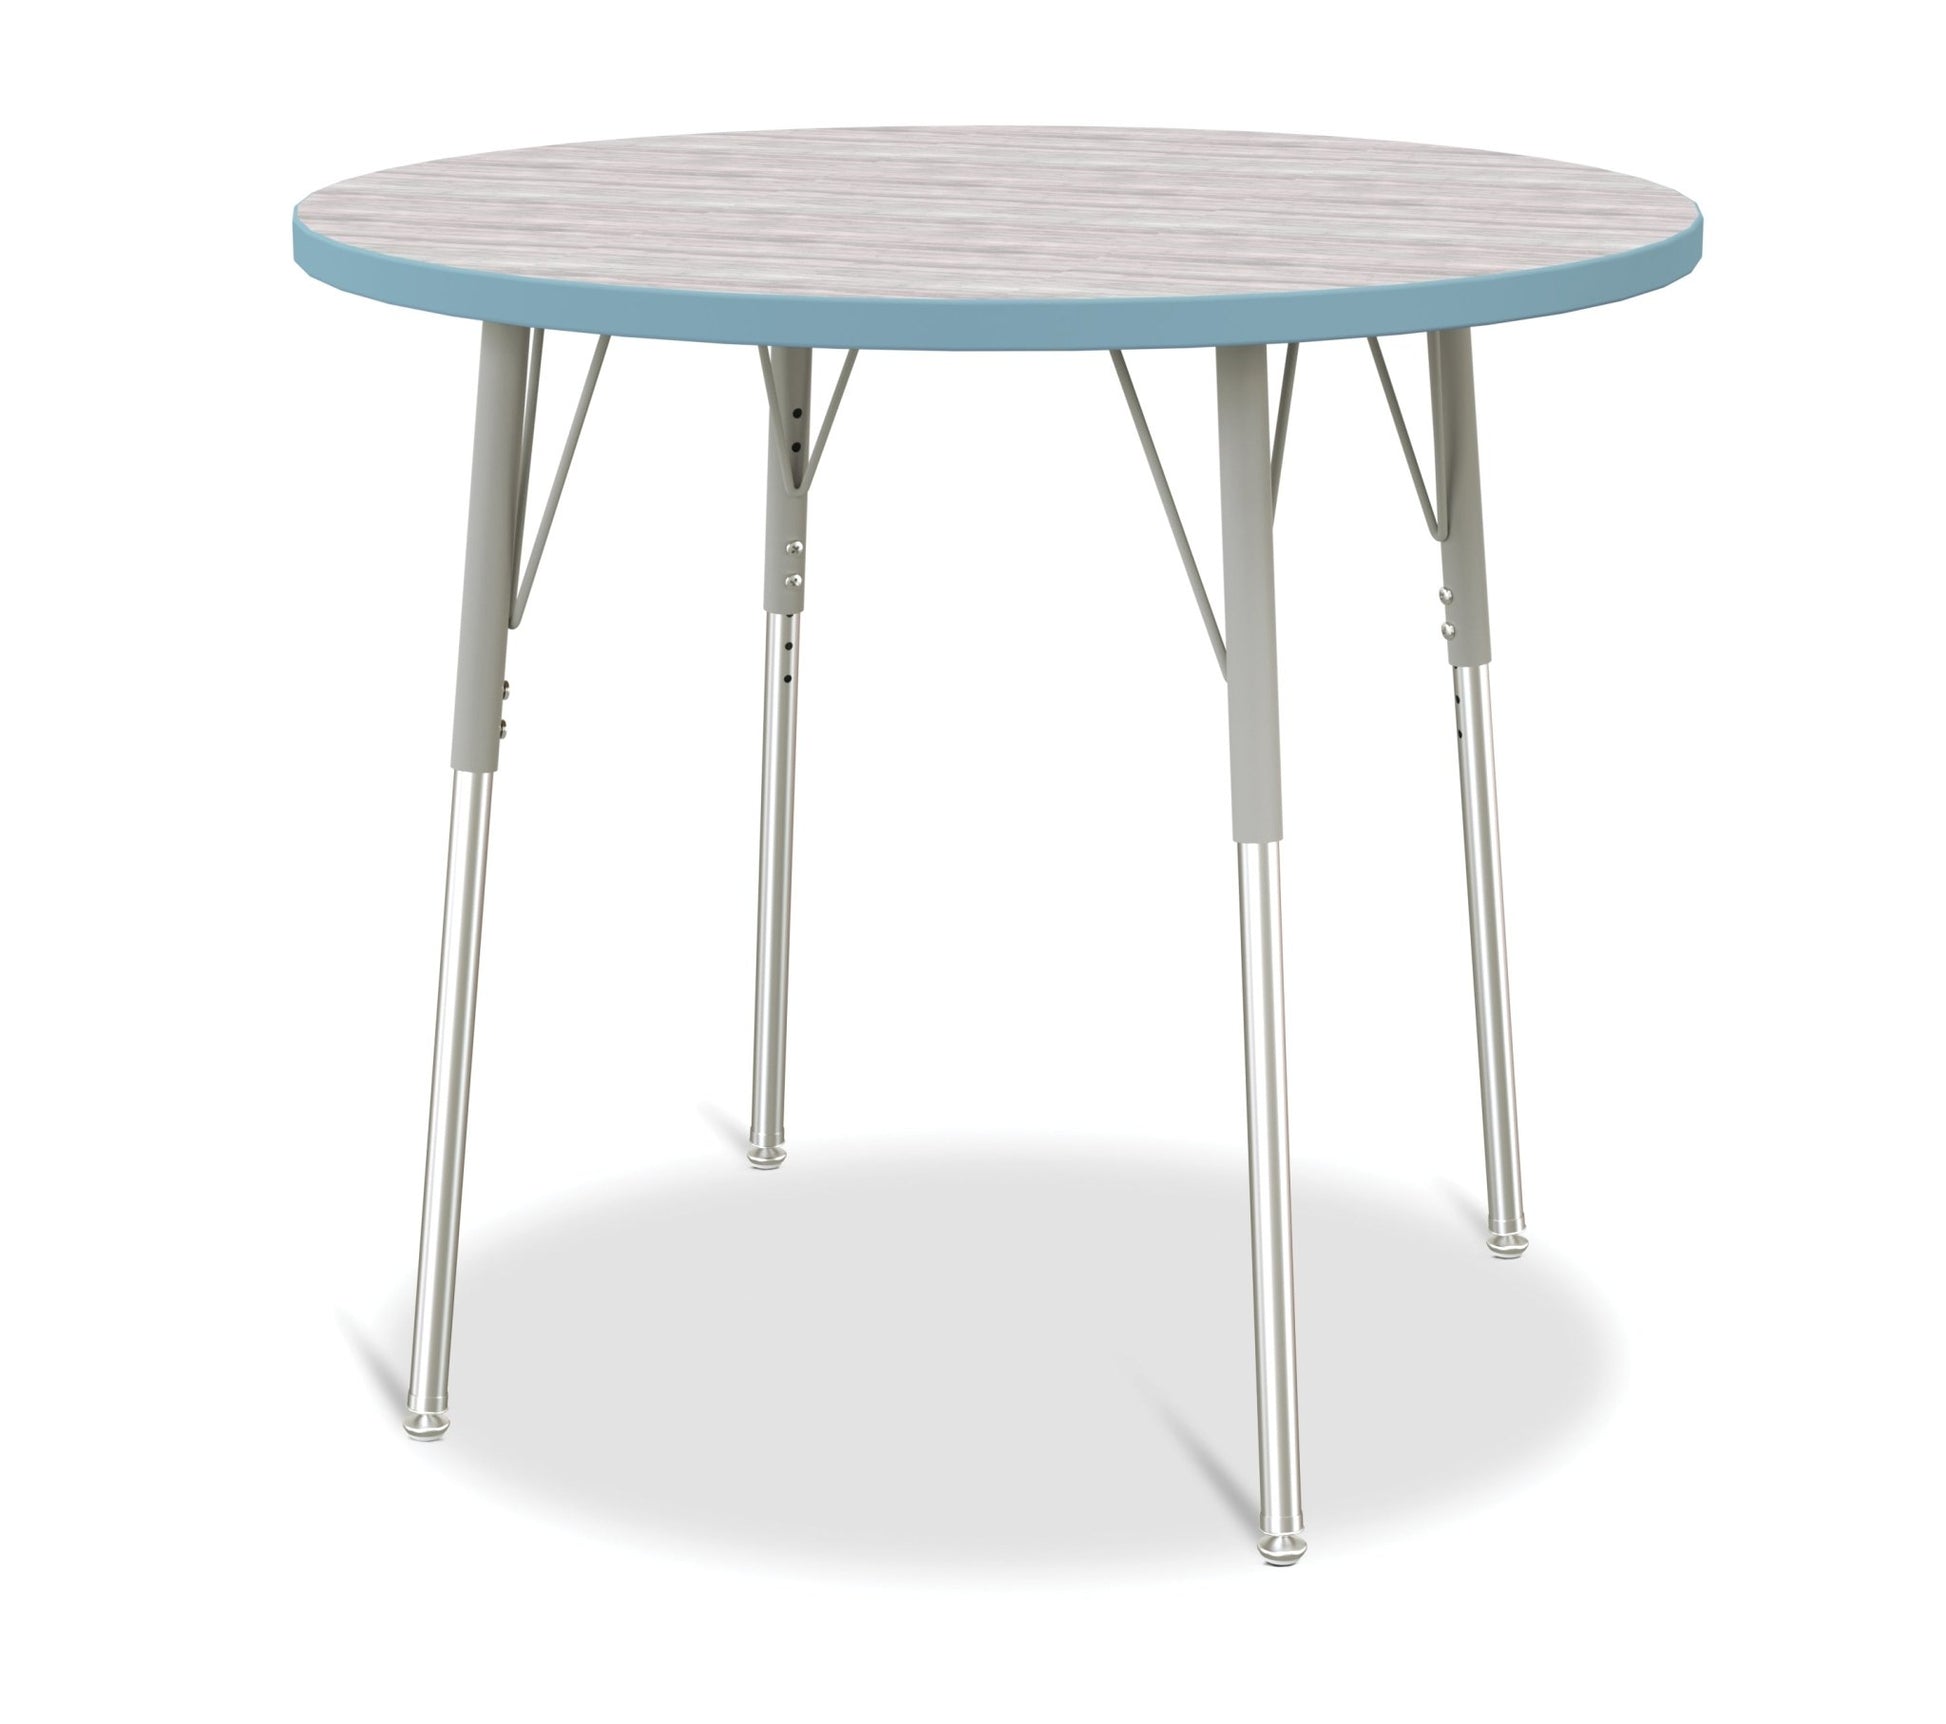 Jonti-Craft Round Activity Table with Heavy Duty Laminate Top 36" Diameter - Height Adjustable Legs - 4th Grade to Adult - SchoolOutlet